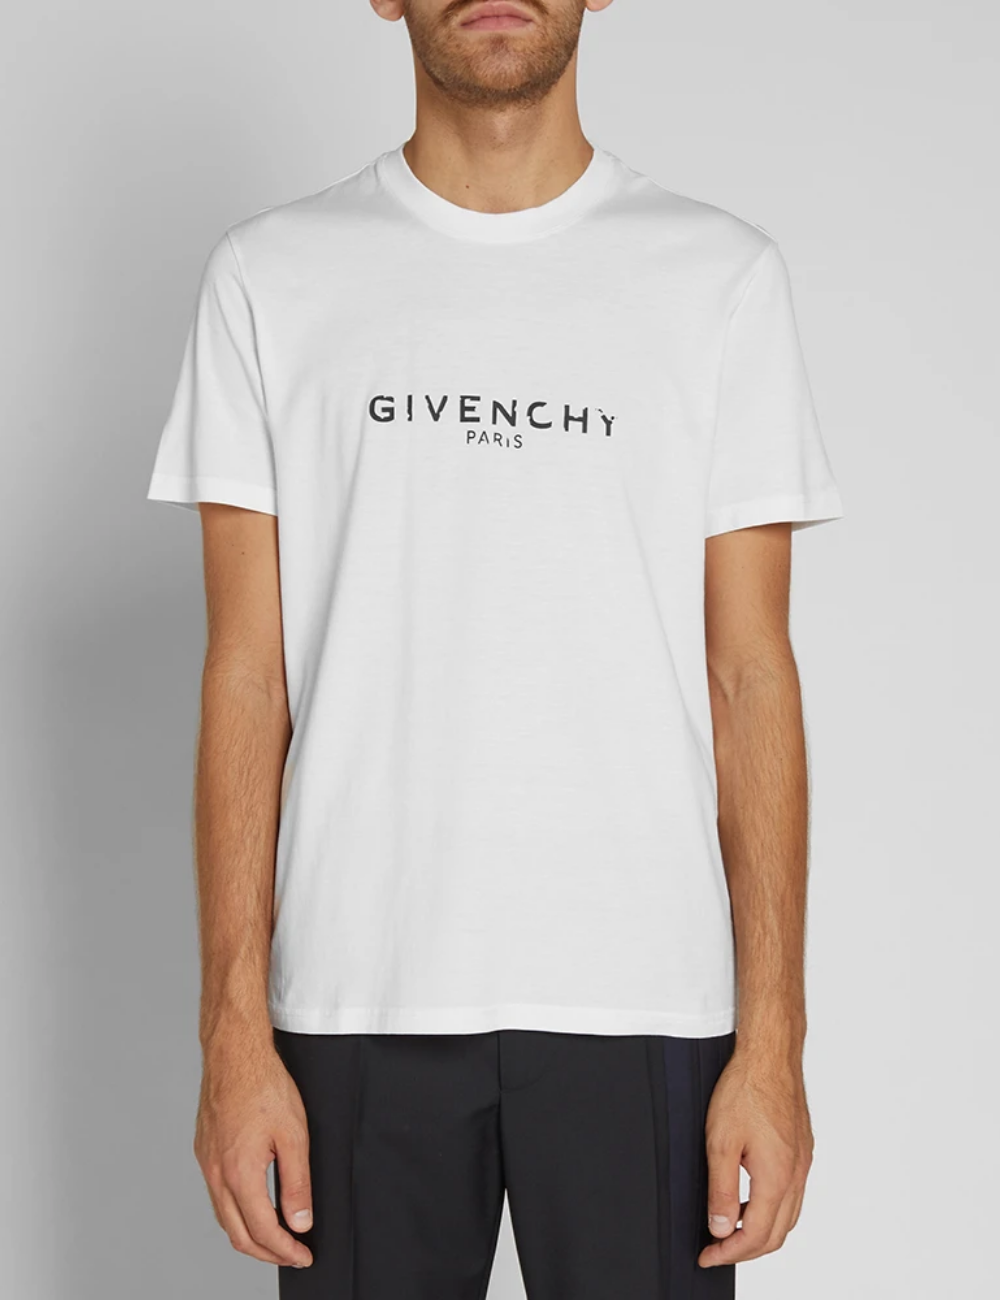 Givenchy Vintage Logo Printed T-Shirt (White) - Shop Streetwear, Sneakers, Slippers and Gifts online | Malaysia - The Factory KL